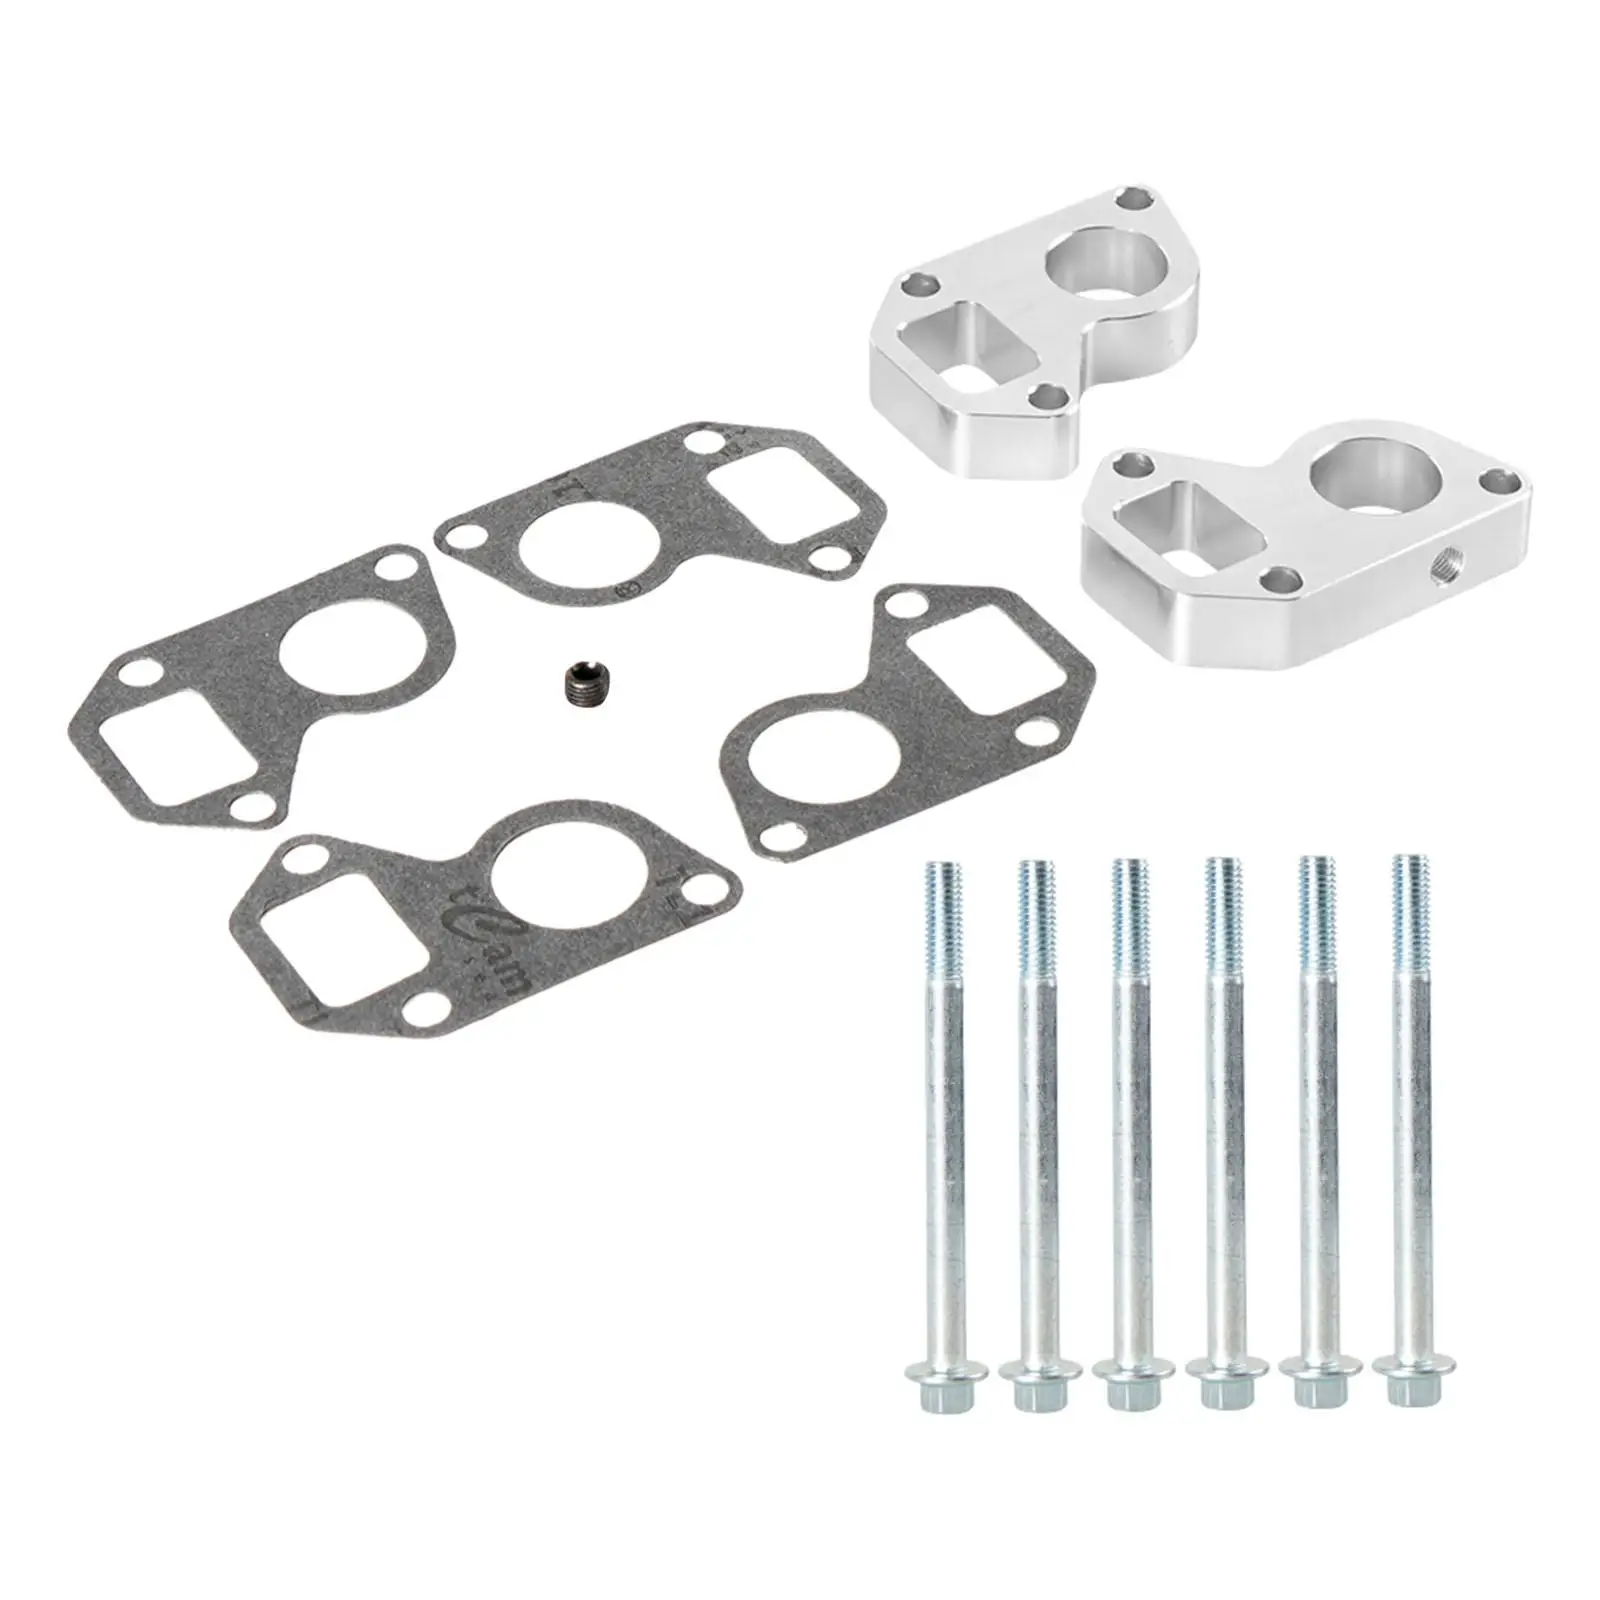 1 Set Water Pump Spacers Adapter Swap Kit Fit for LS Accessories Parts